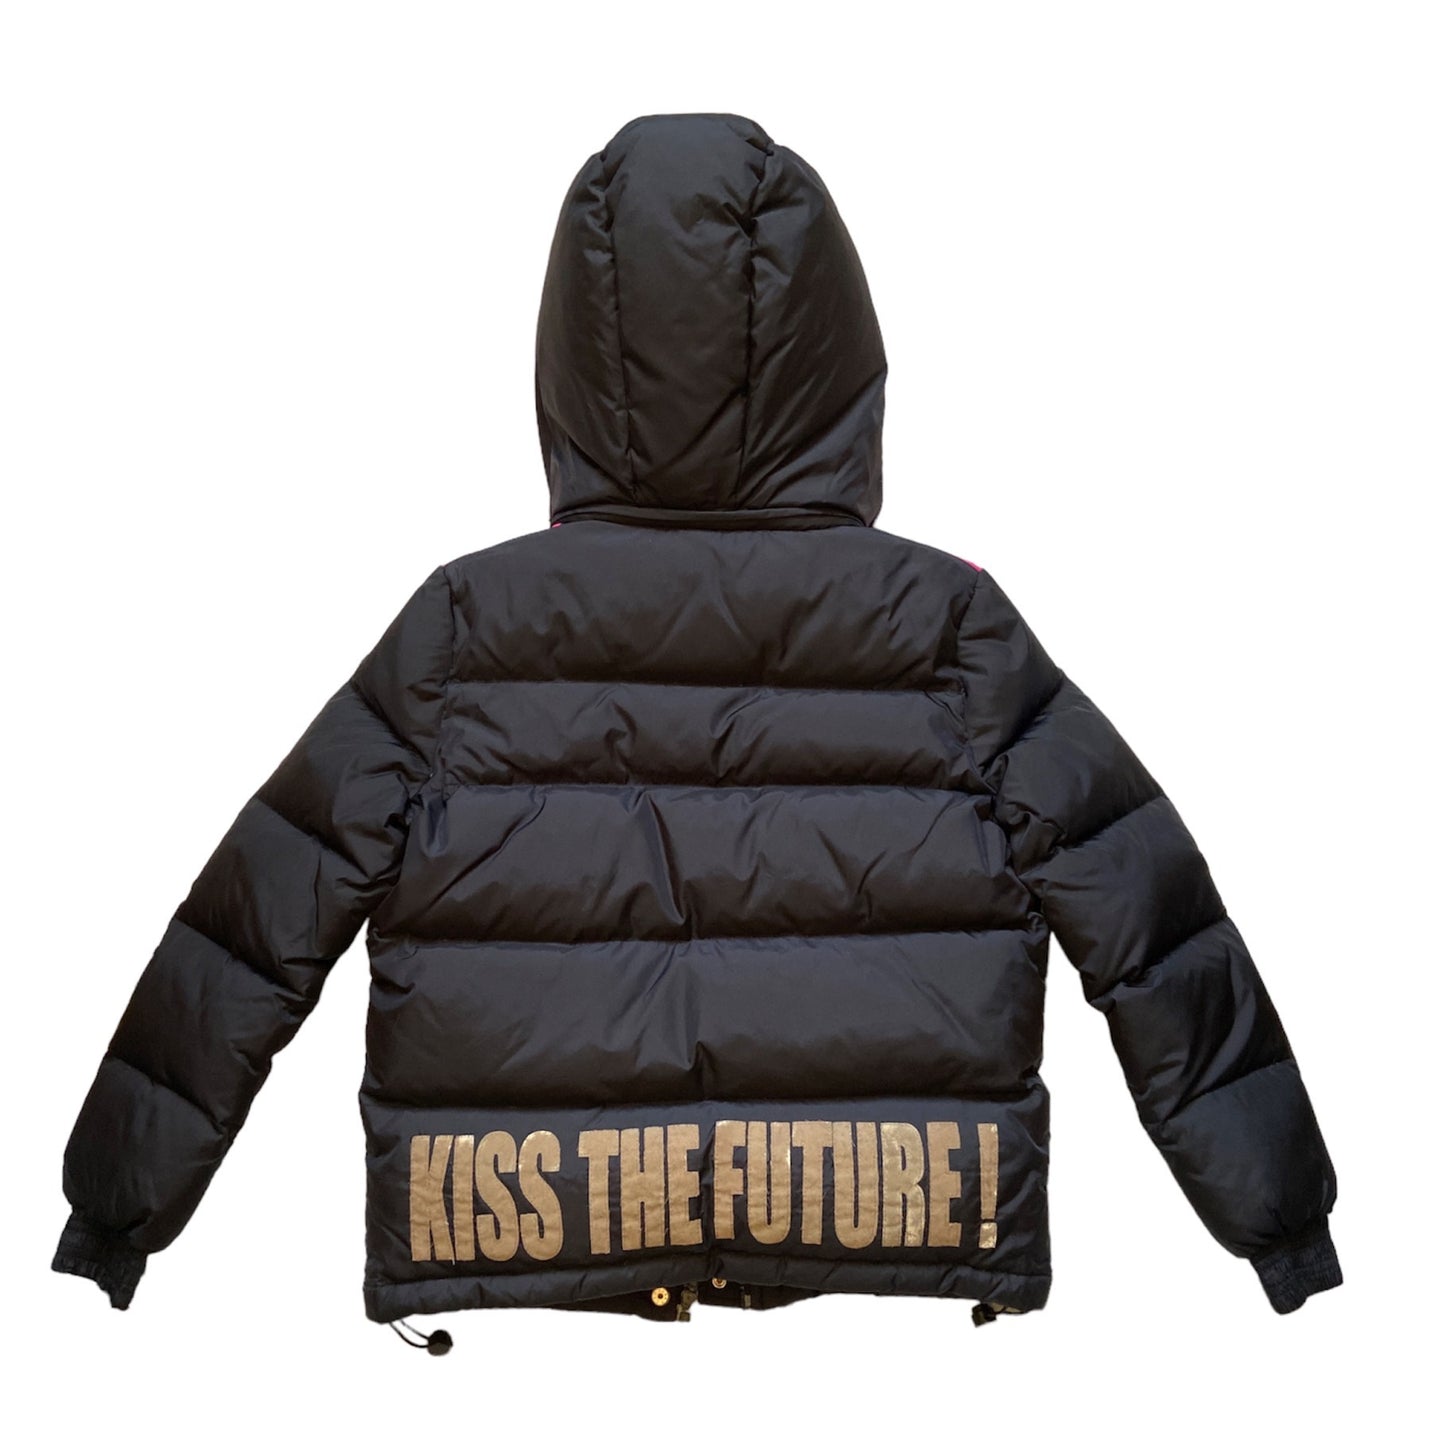 W&LT "KISS THE FUTURE" goose down puffer jacket with hood M